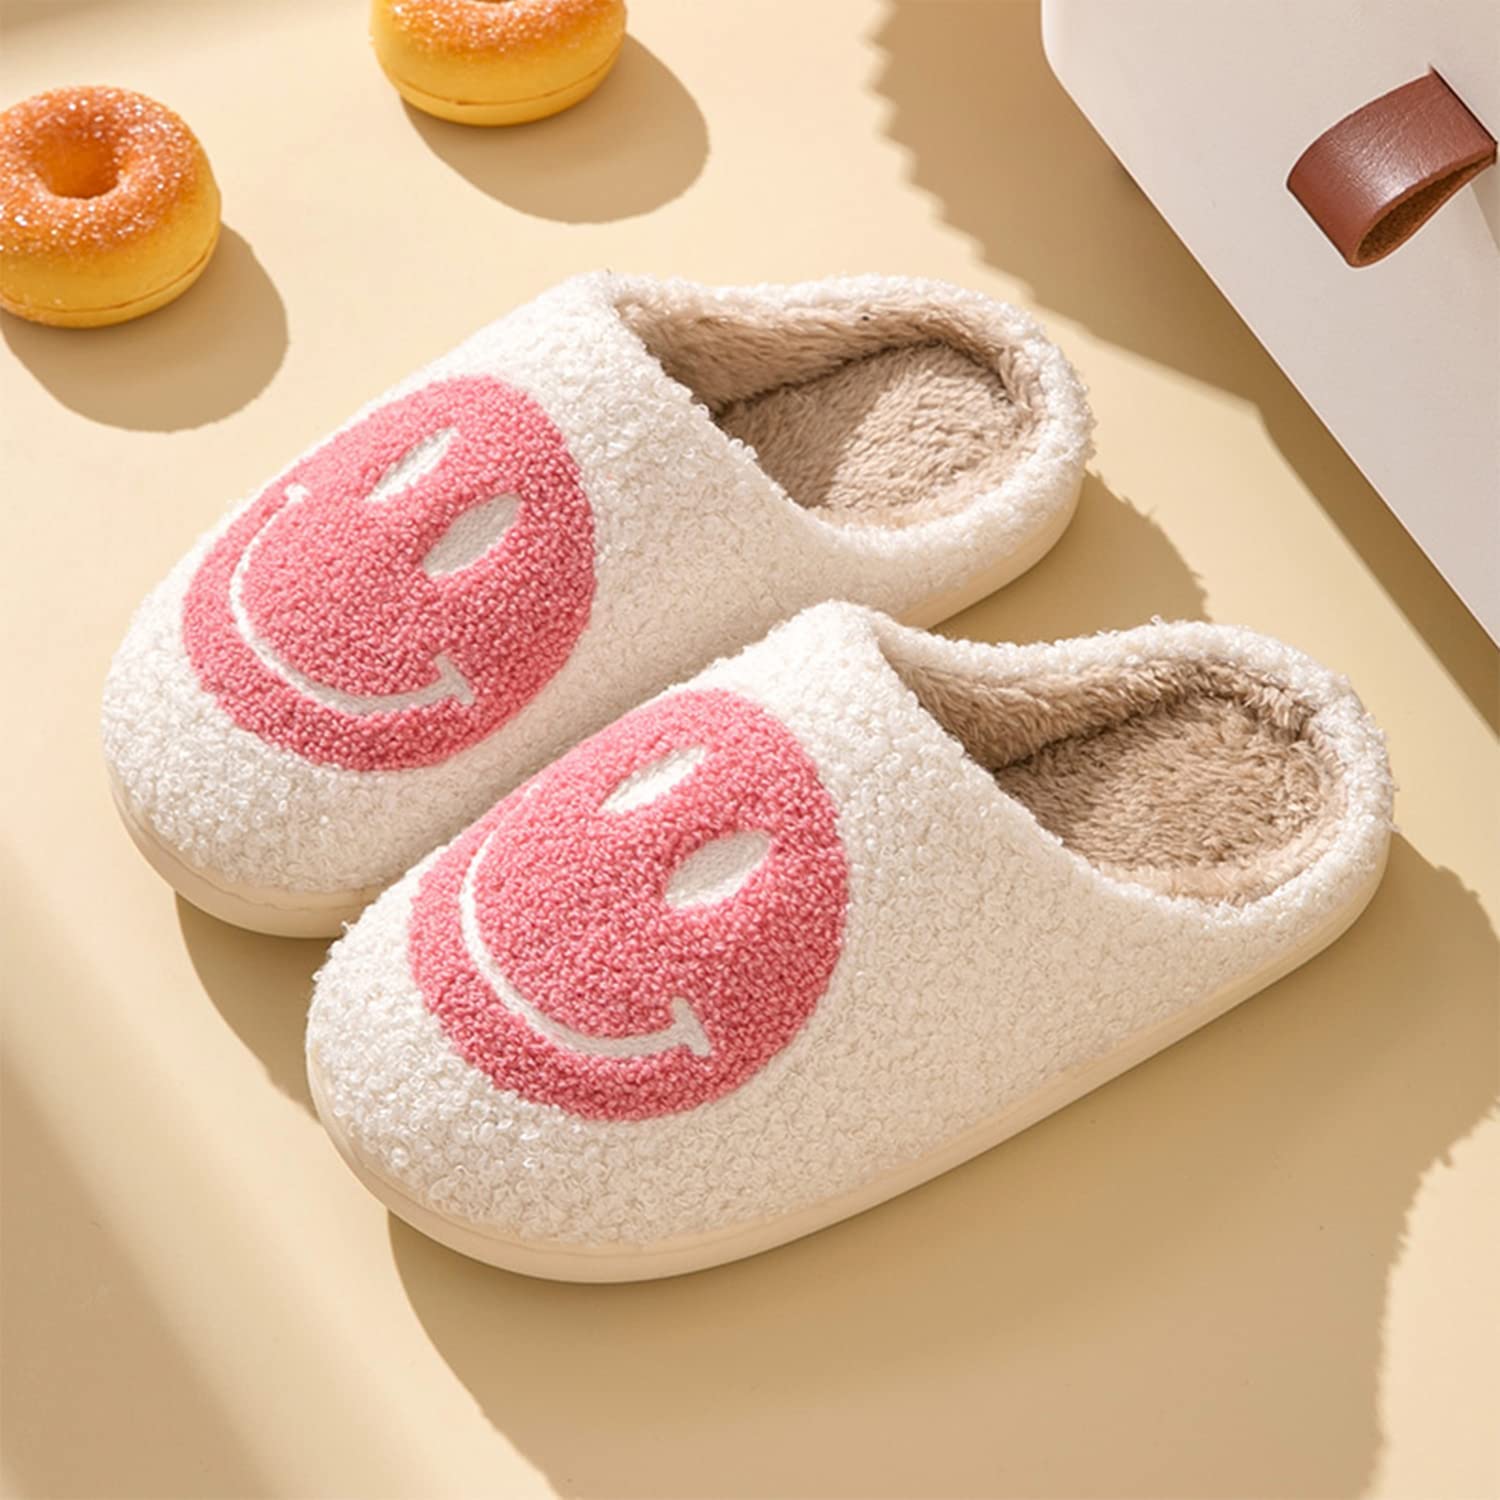 Smile Face Slippers fpr Women Happy face slippers Retro Soft Plush Warm Slip-on Slippers, Cozy Indoor Outdoor Slippers with Memory Foam for Men Women